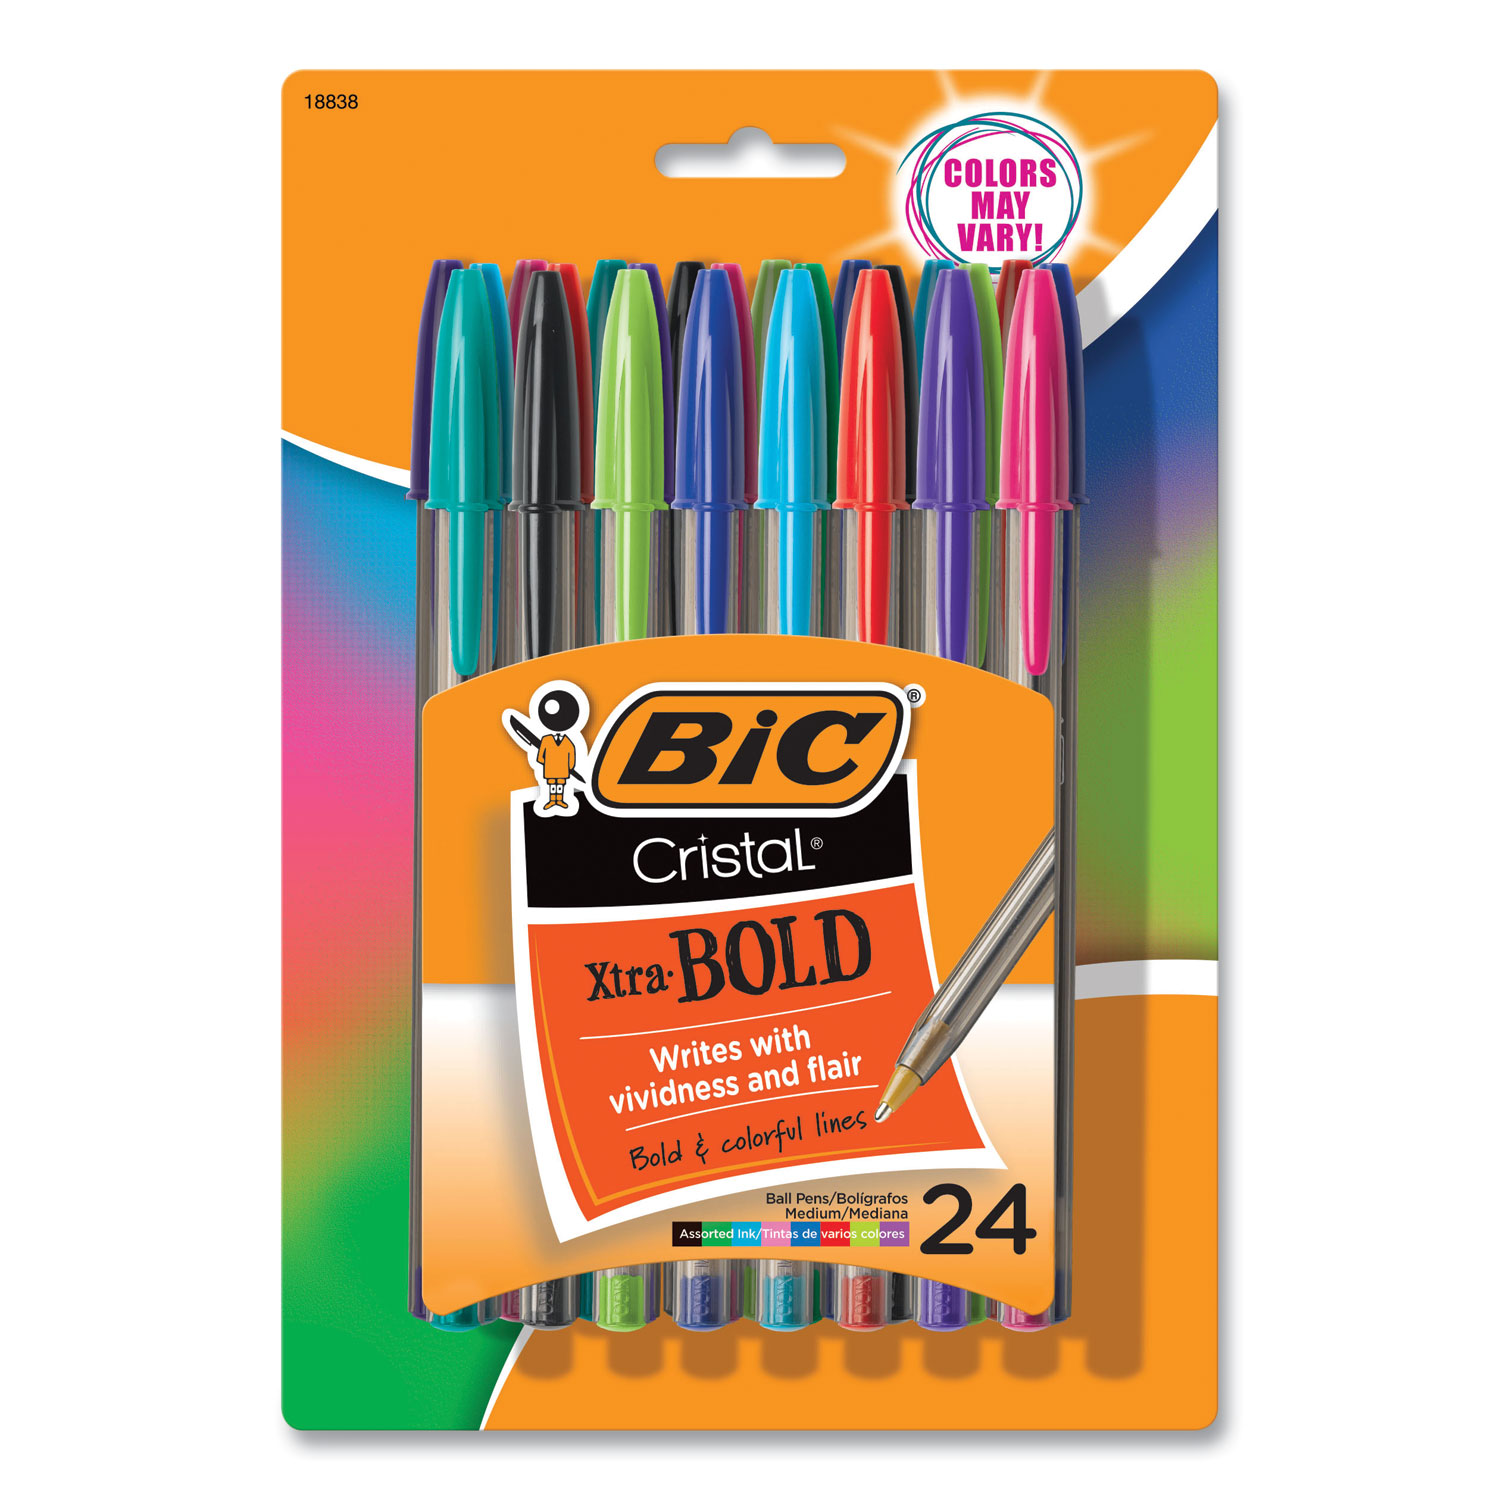 Bic CRYSTAL BALL PEN 1.6mm BLUE : : Stationery